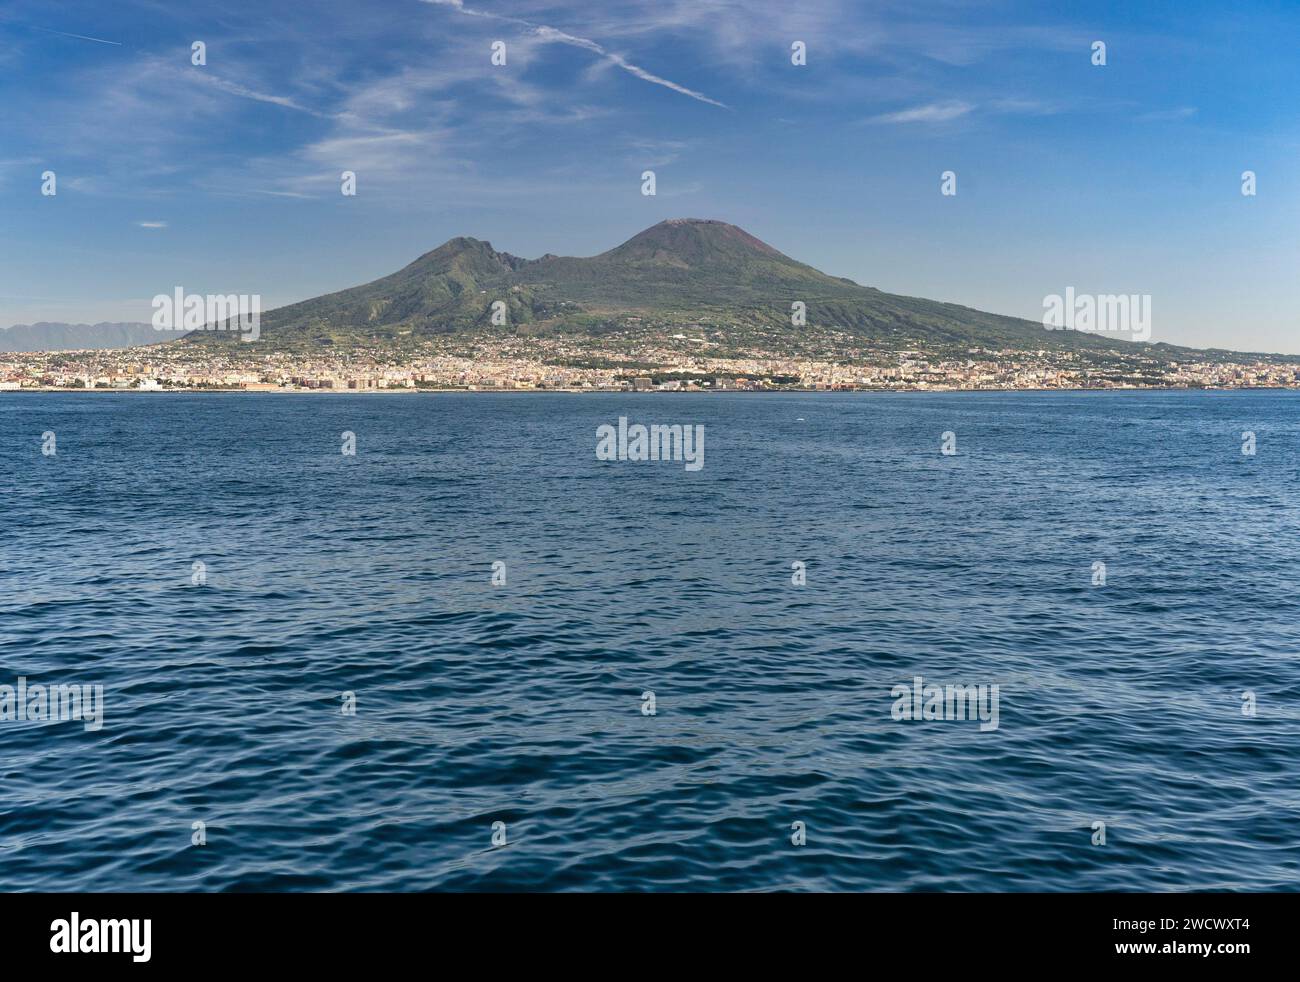 Italy, Campania, Naples, the Bay of Naples and Vesuvius in the background Stock Photo